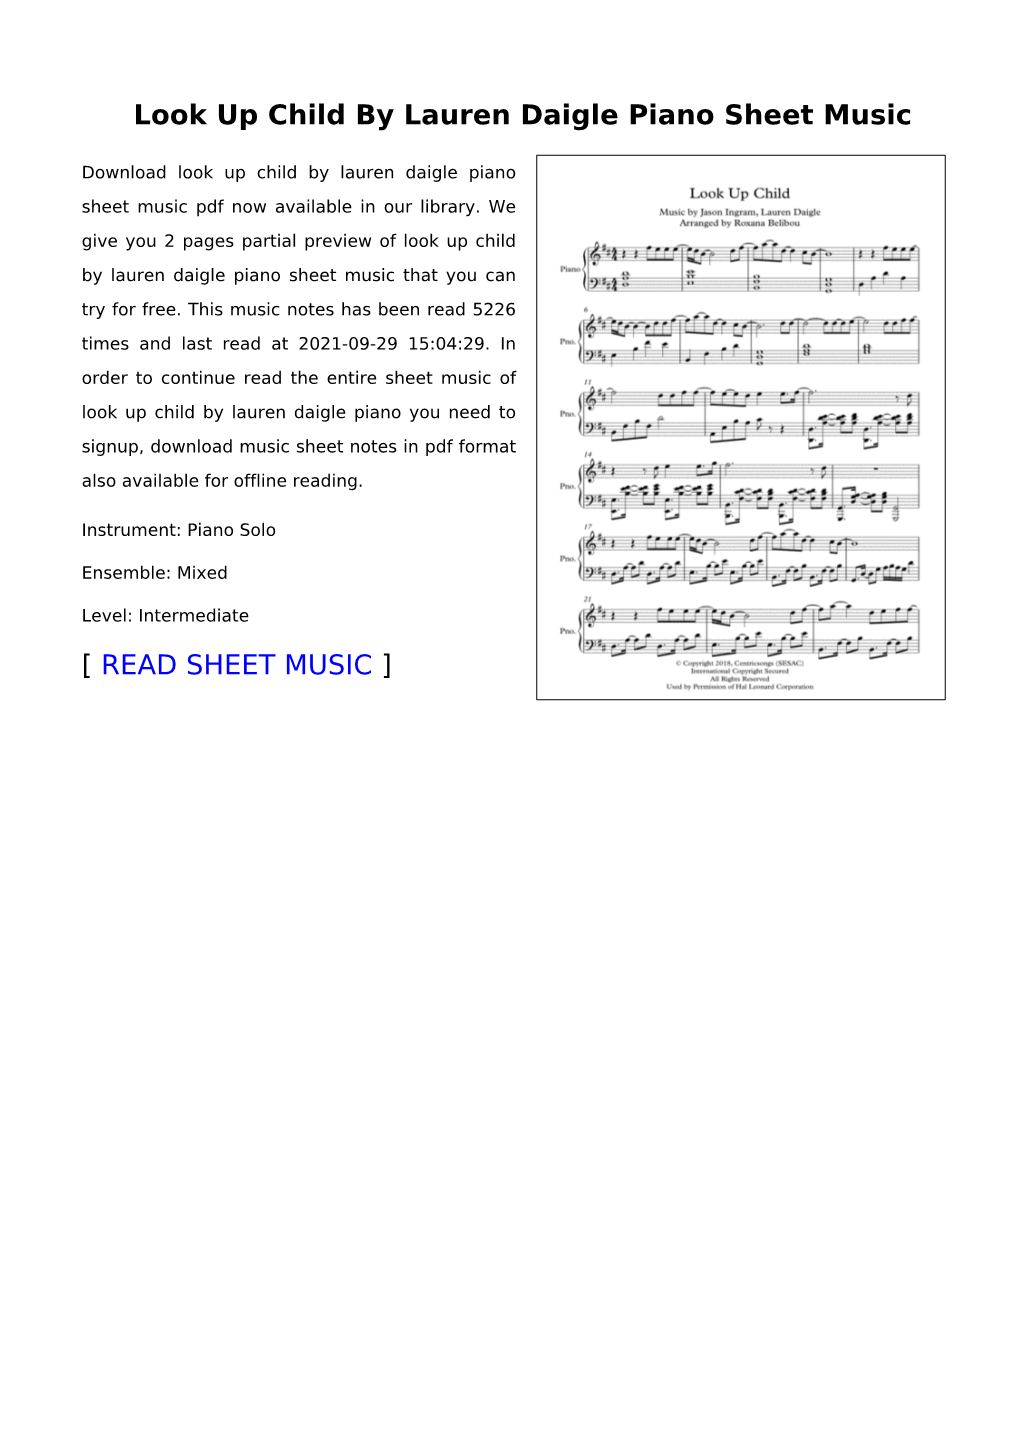 Look up Child by Lauren Daigle Piano Sheet Music